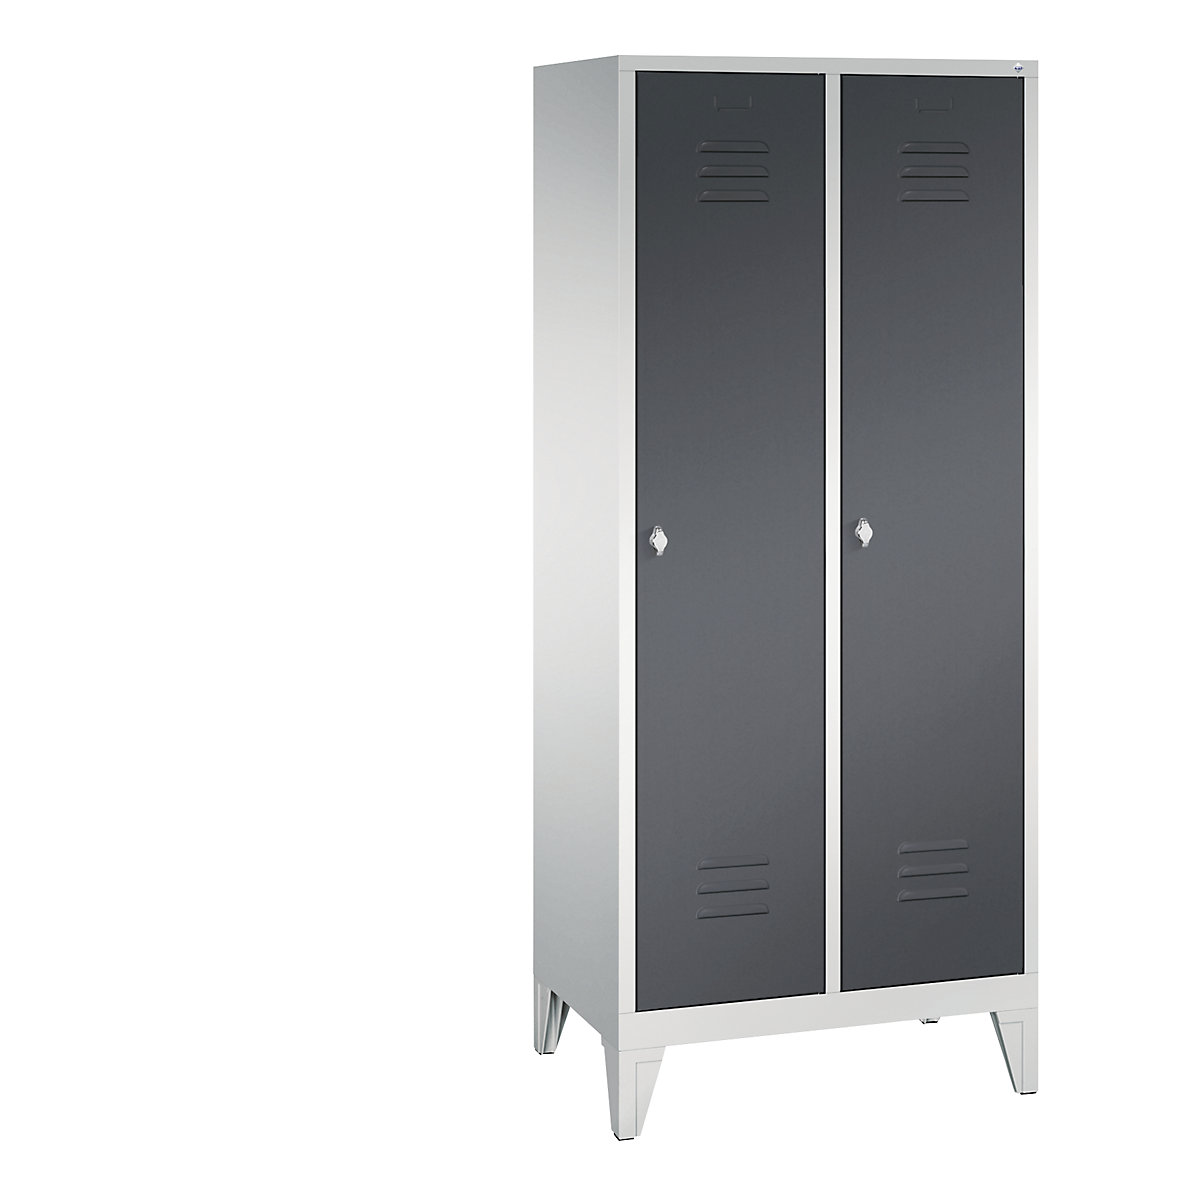 CLASSIC cloakroom locker with feet – C+P, 2 compartments, compartment width 400 mm, light grey / black grey-4